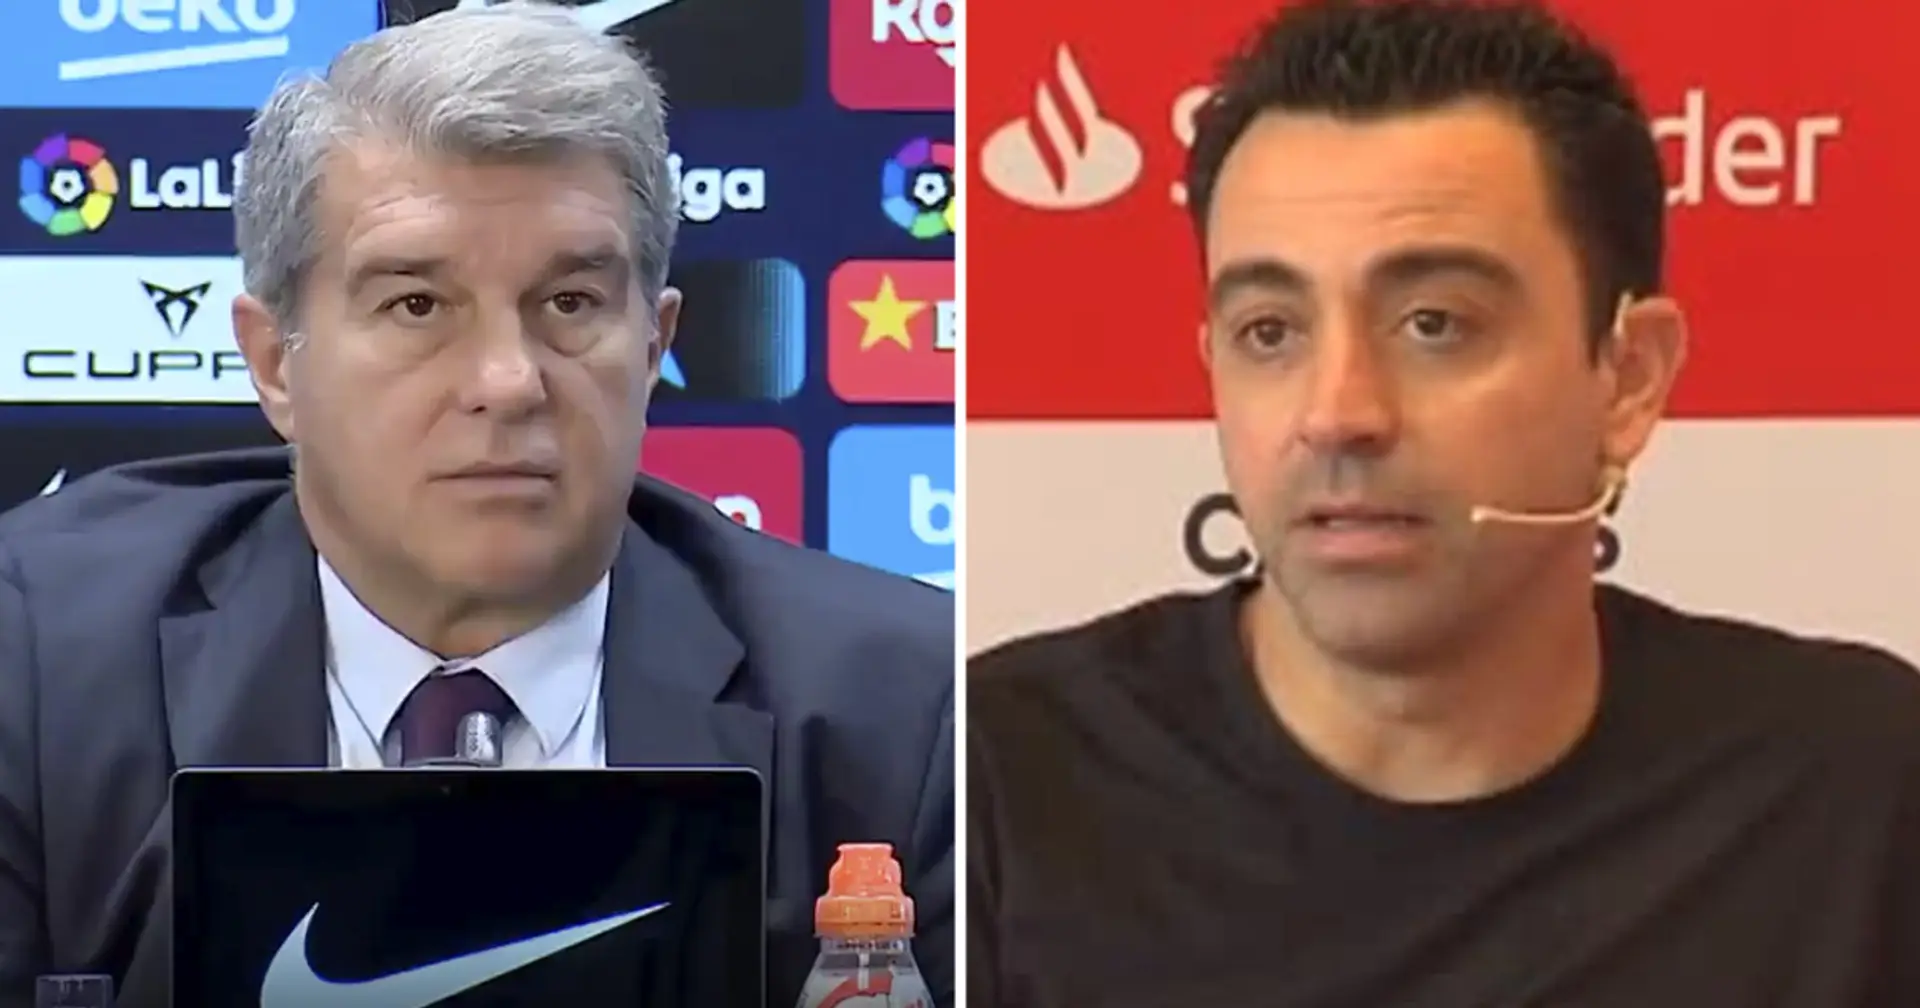 'I know what he thinks should be done at Barca': Laporta all but confirms Xavi's arrival